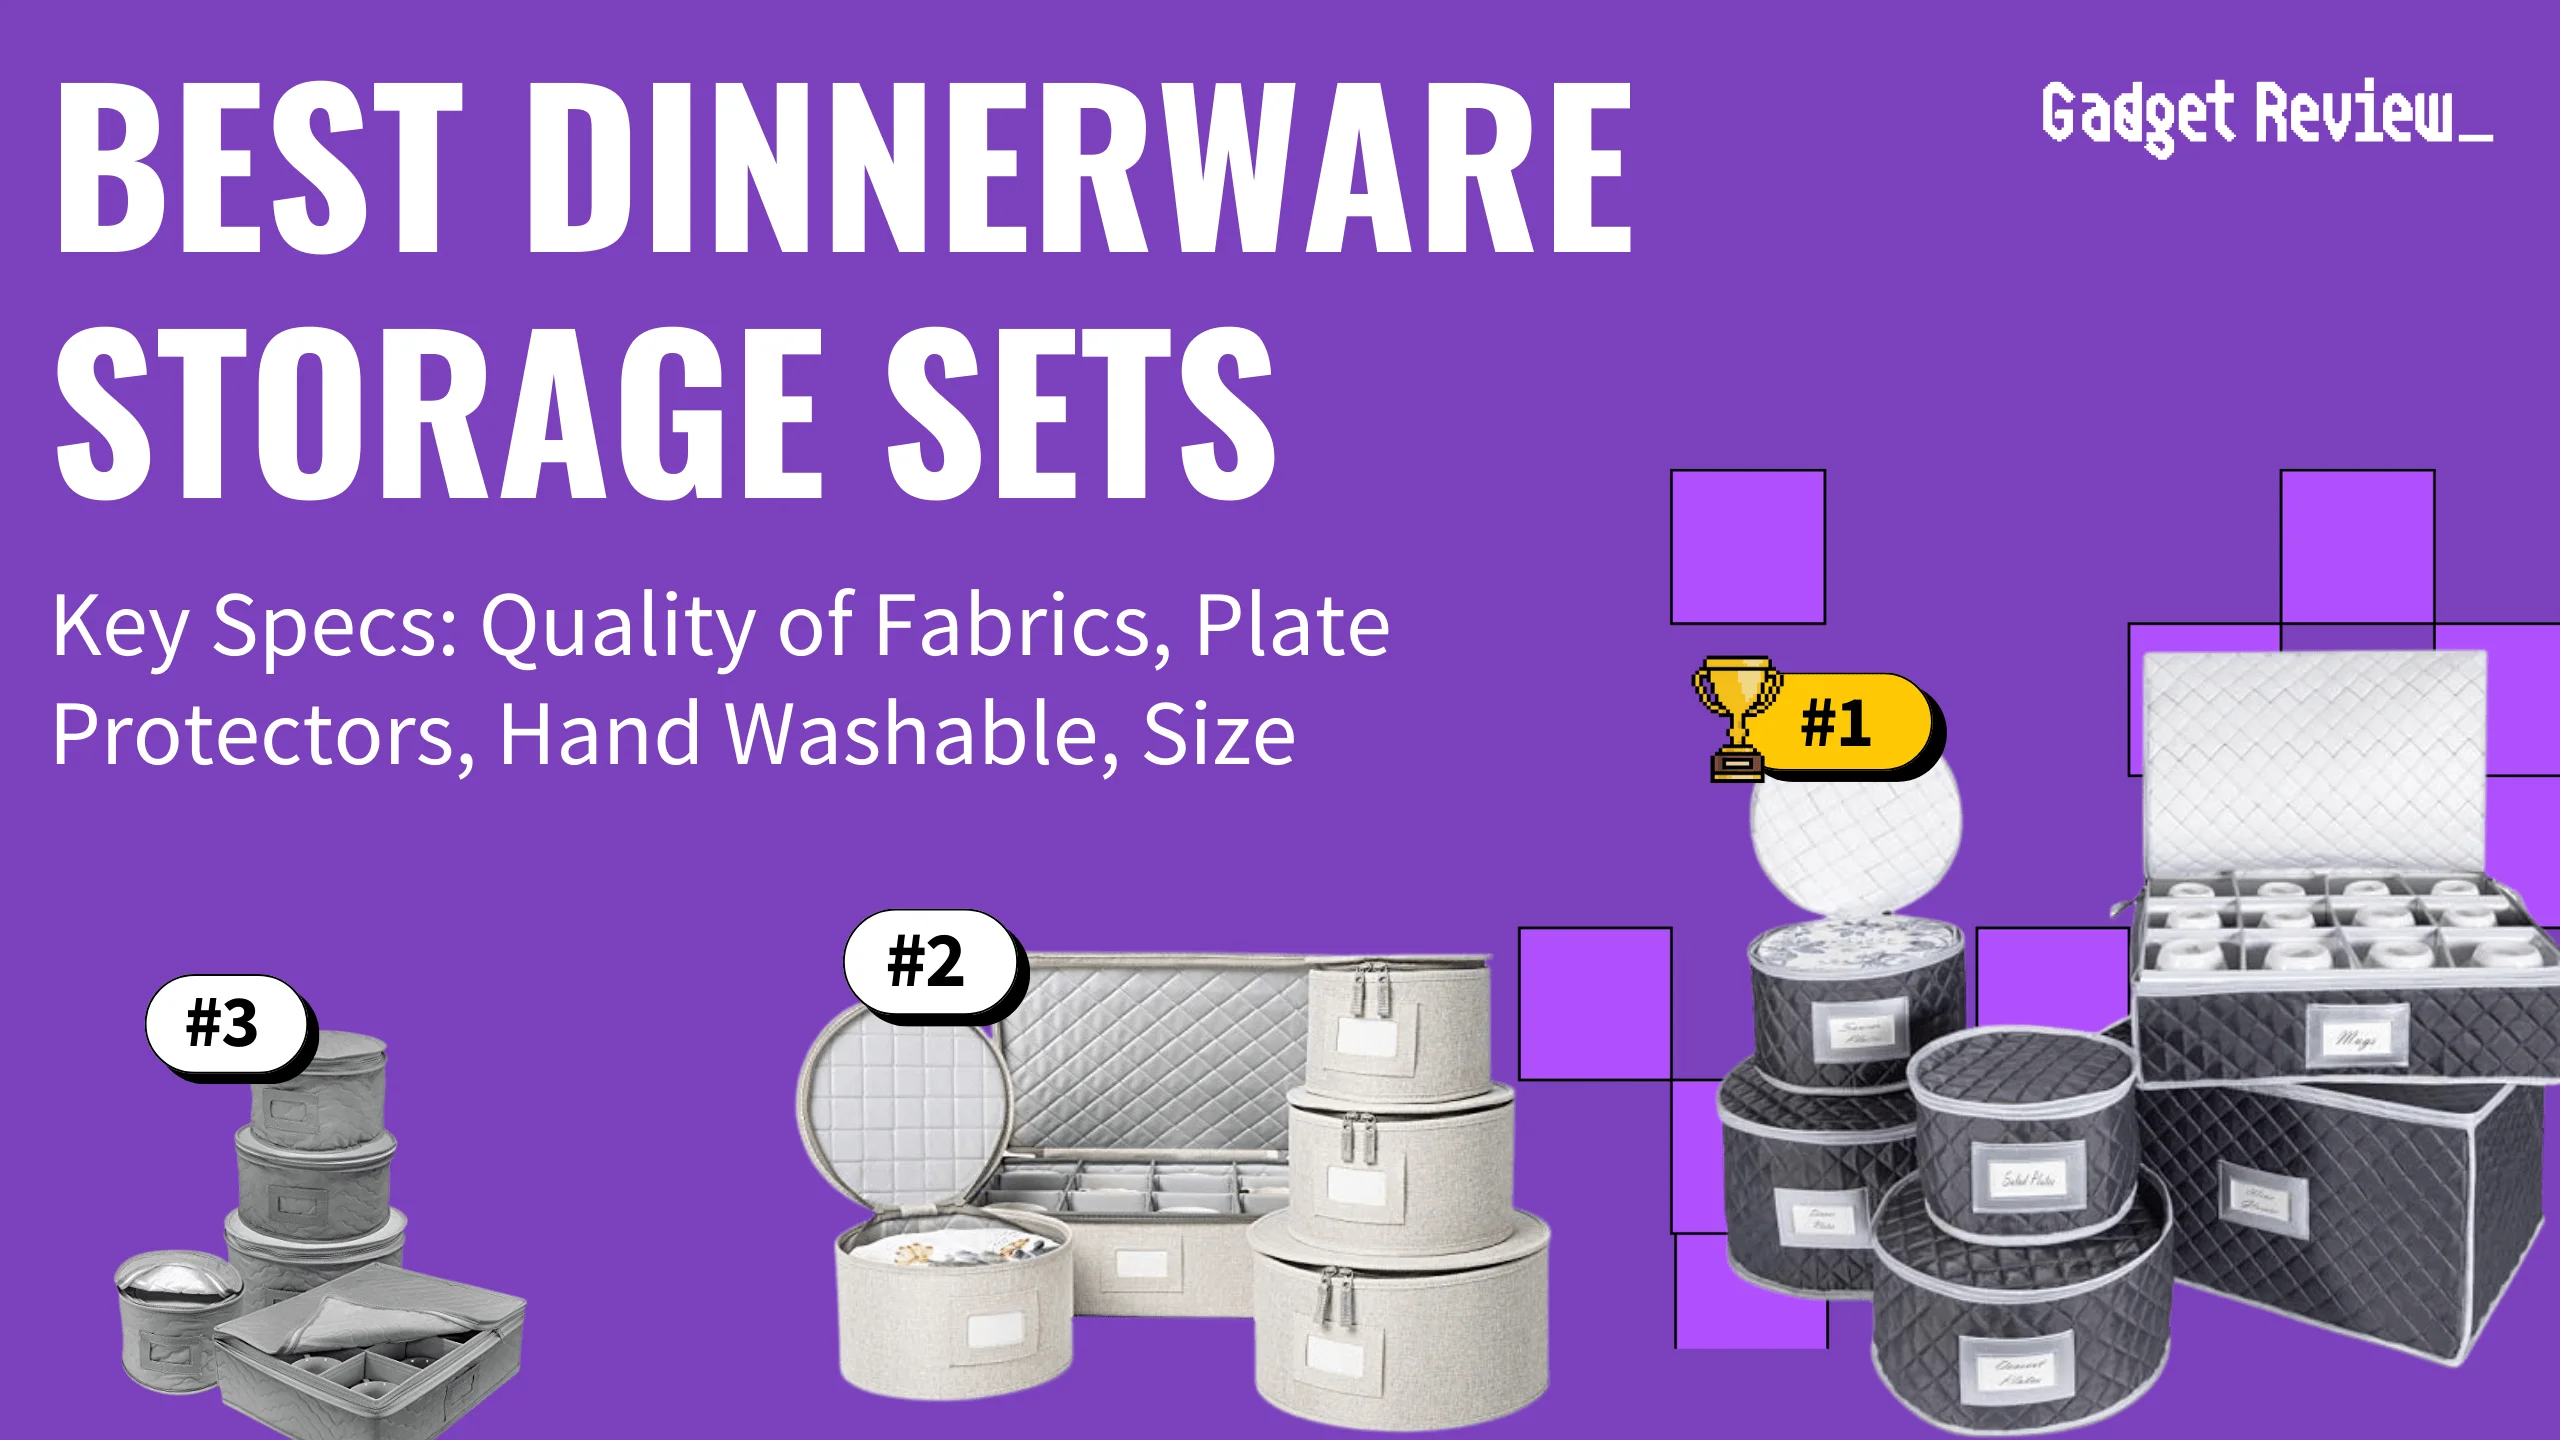 best dinnerware storage sets featured image that shows the top three best kitchen product models